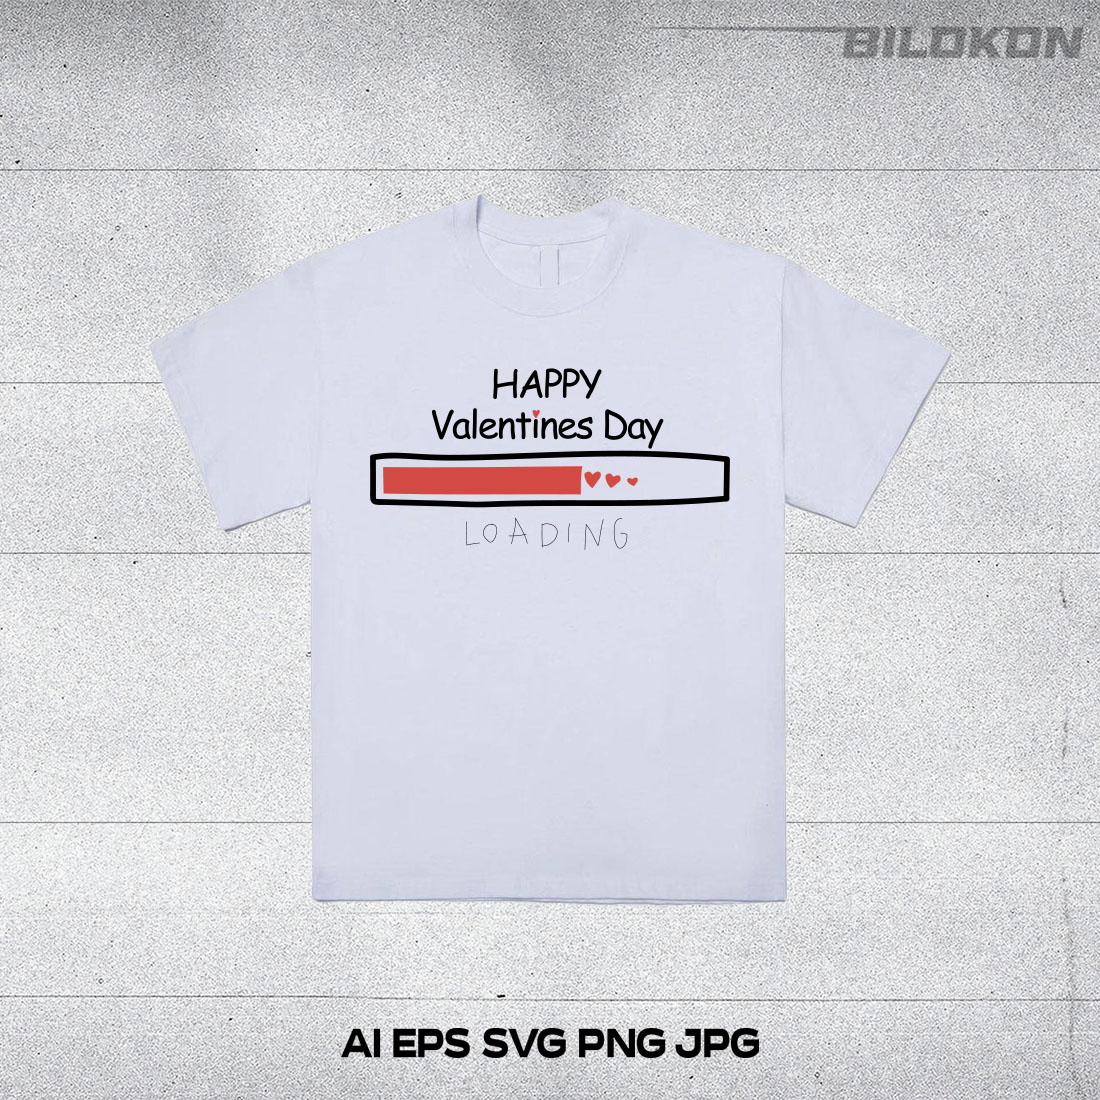 Image of a t-shirt with a gorgeous Happy Valentines Day slogan and a loading bar